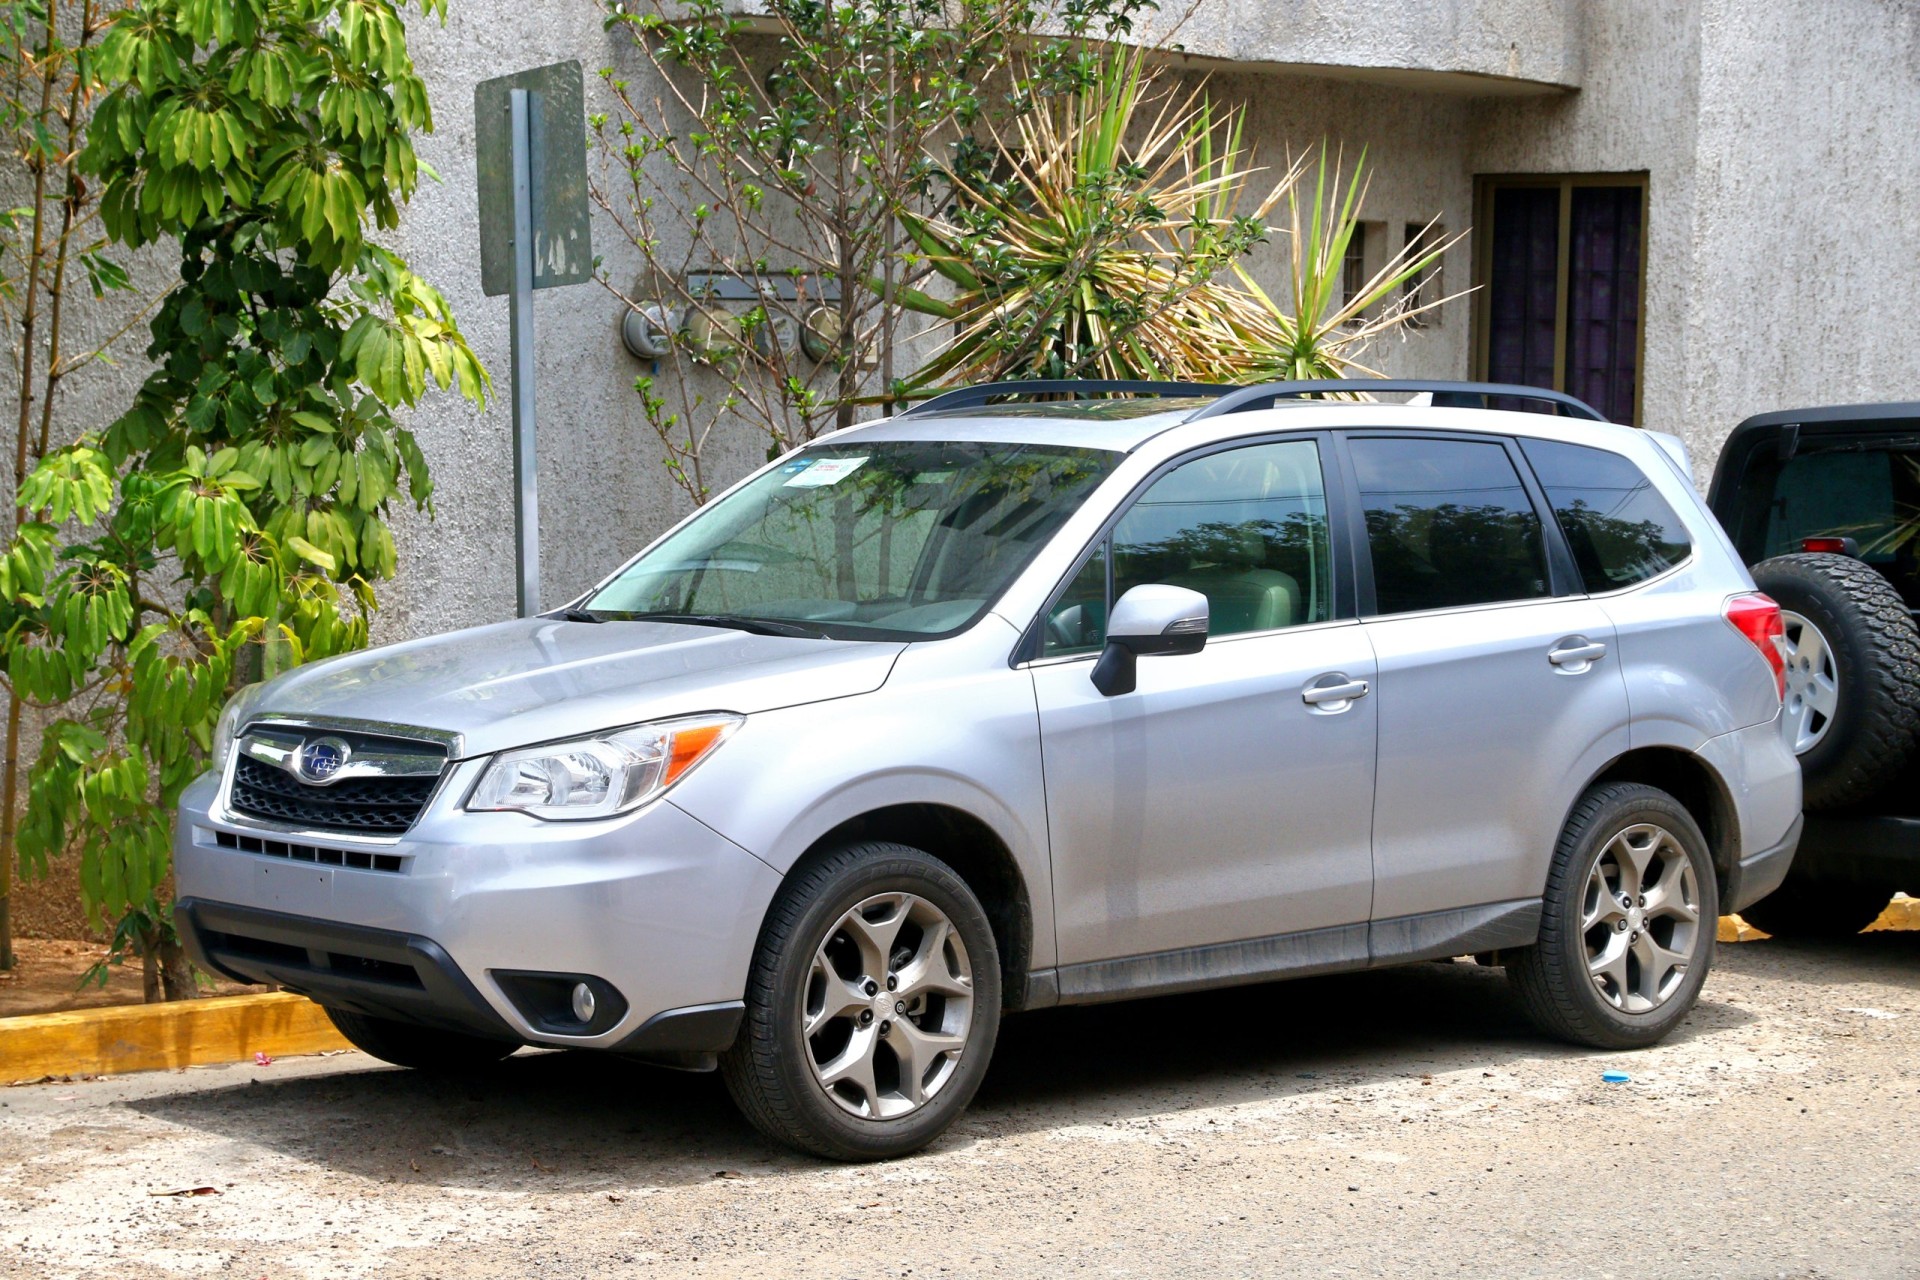 2015 Subaru Forester in the city street.